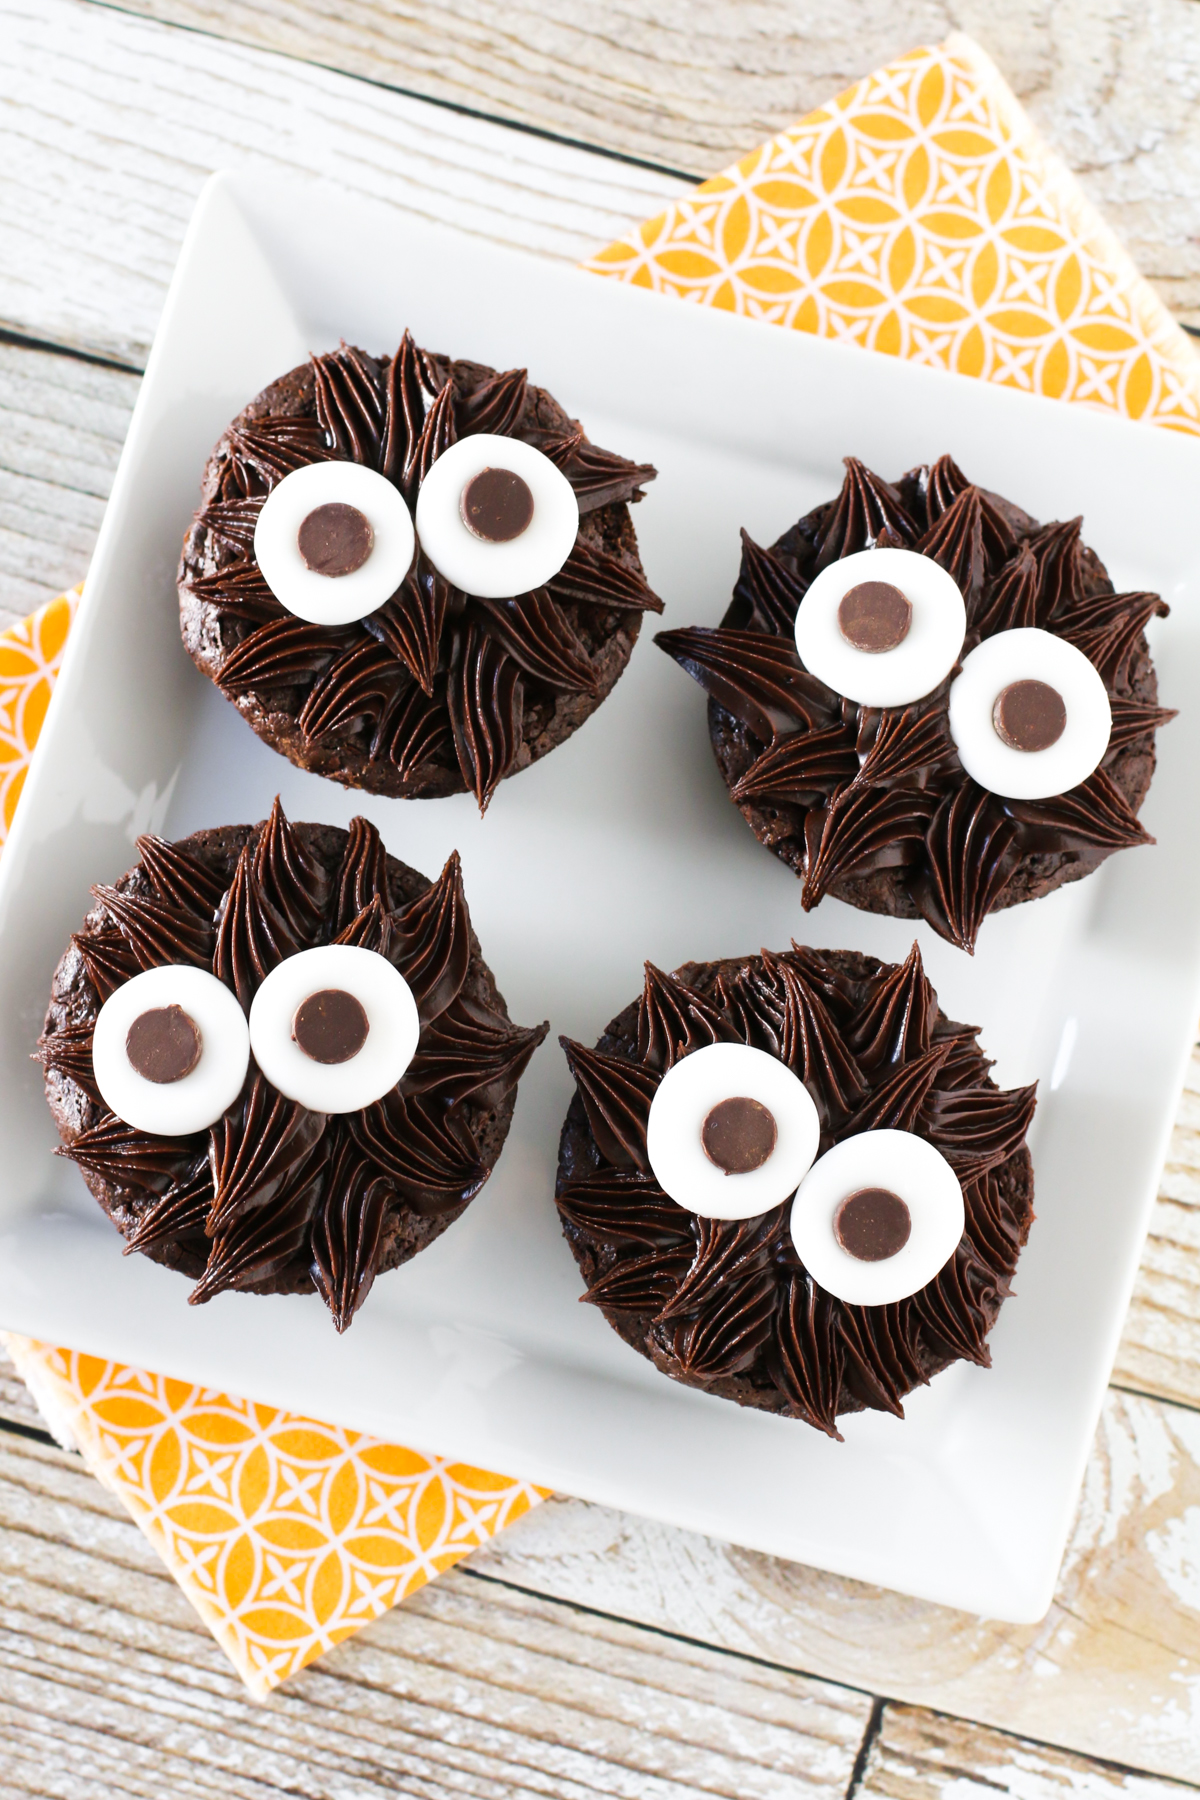 Gluten Free Vegan Chocolate Monster Brownies. These adorable frosted brownies are allergen free and spooktacular!